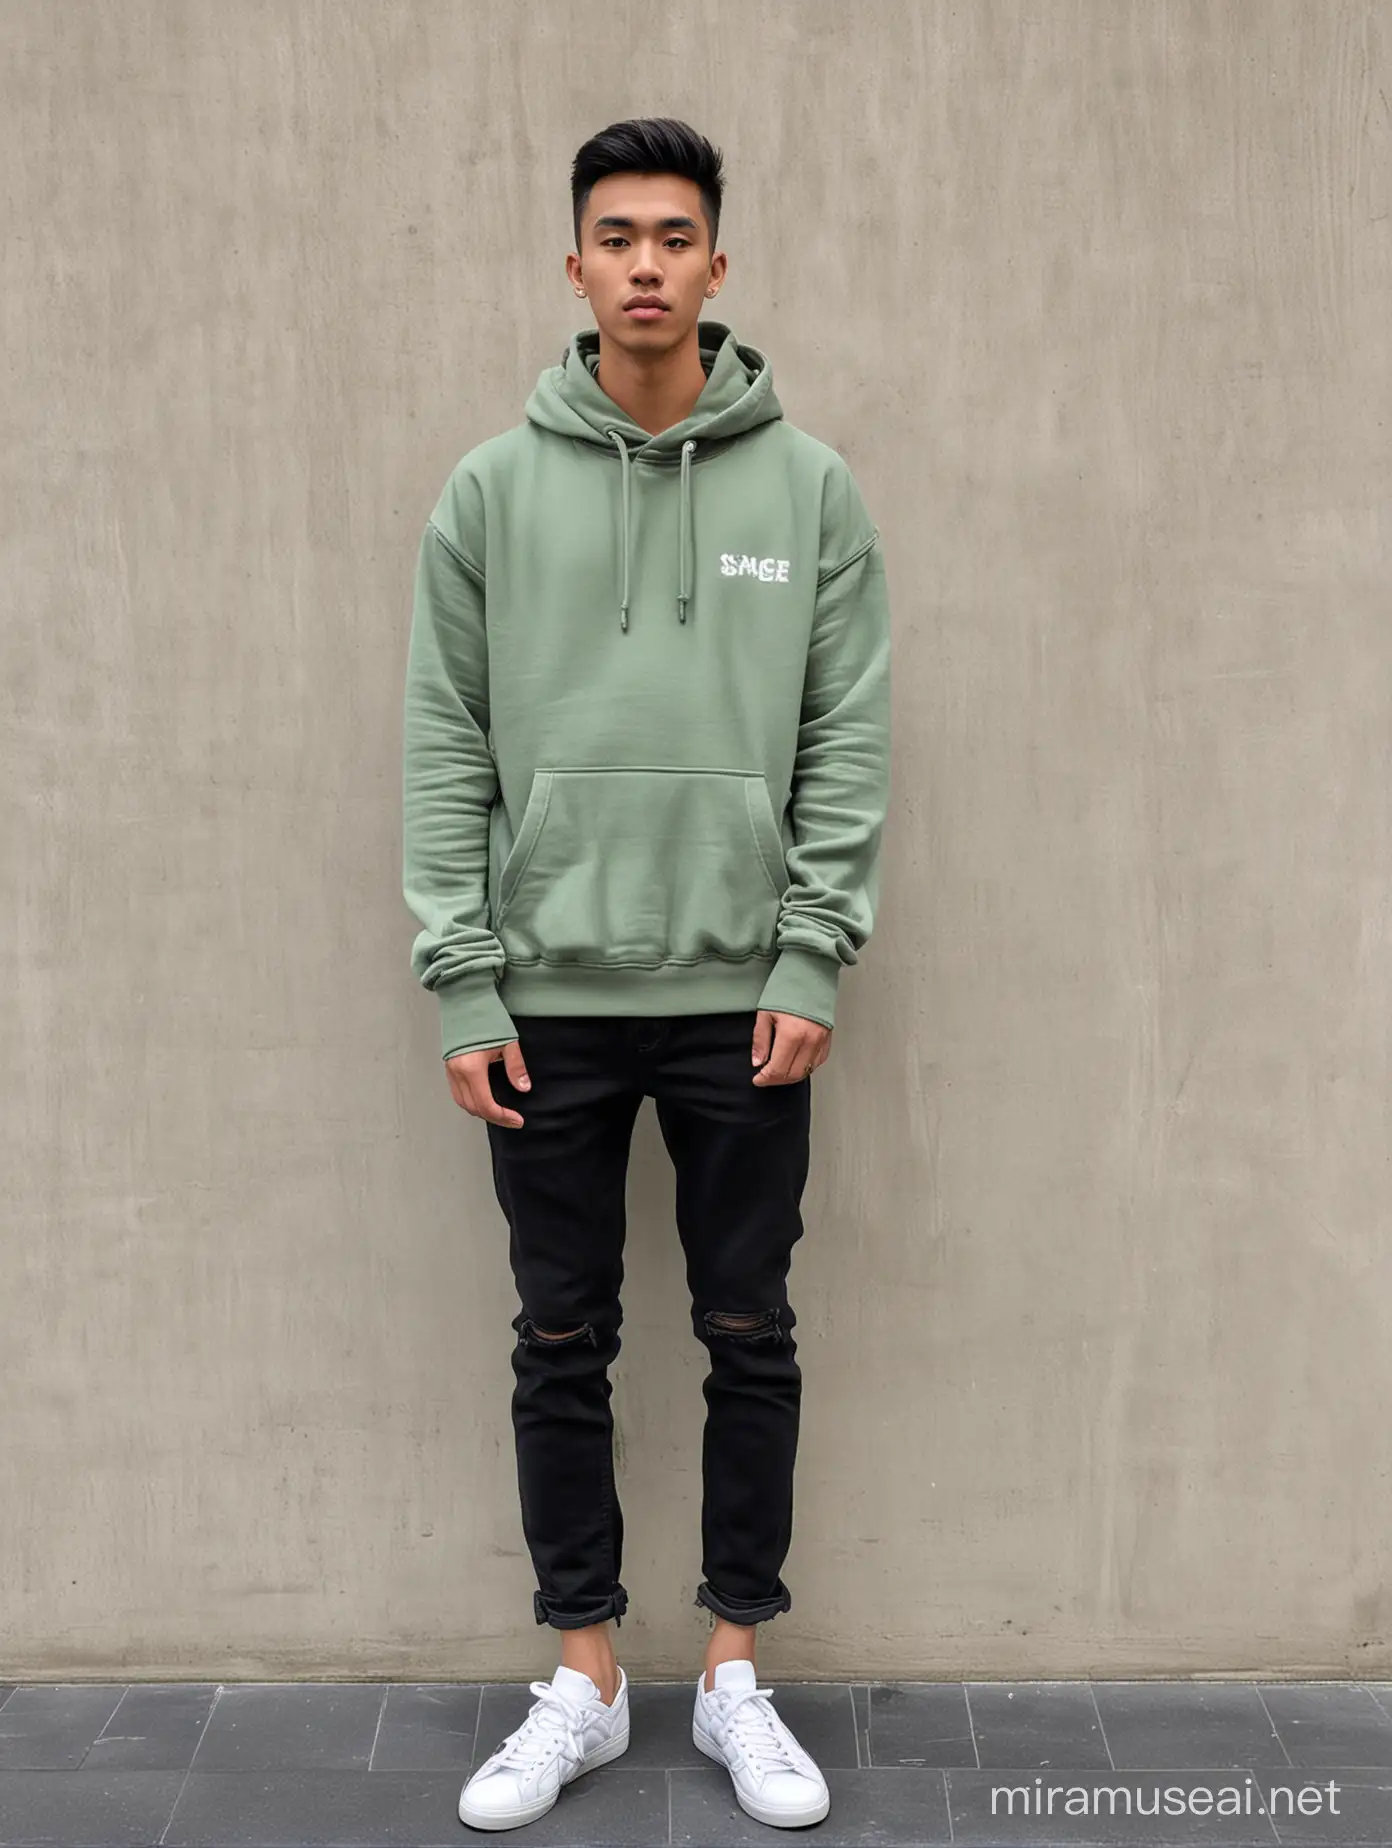 Stylish Indonesian Man in Sage Hoodie and Black Jeans